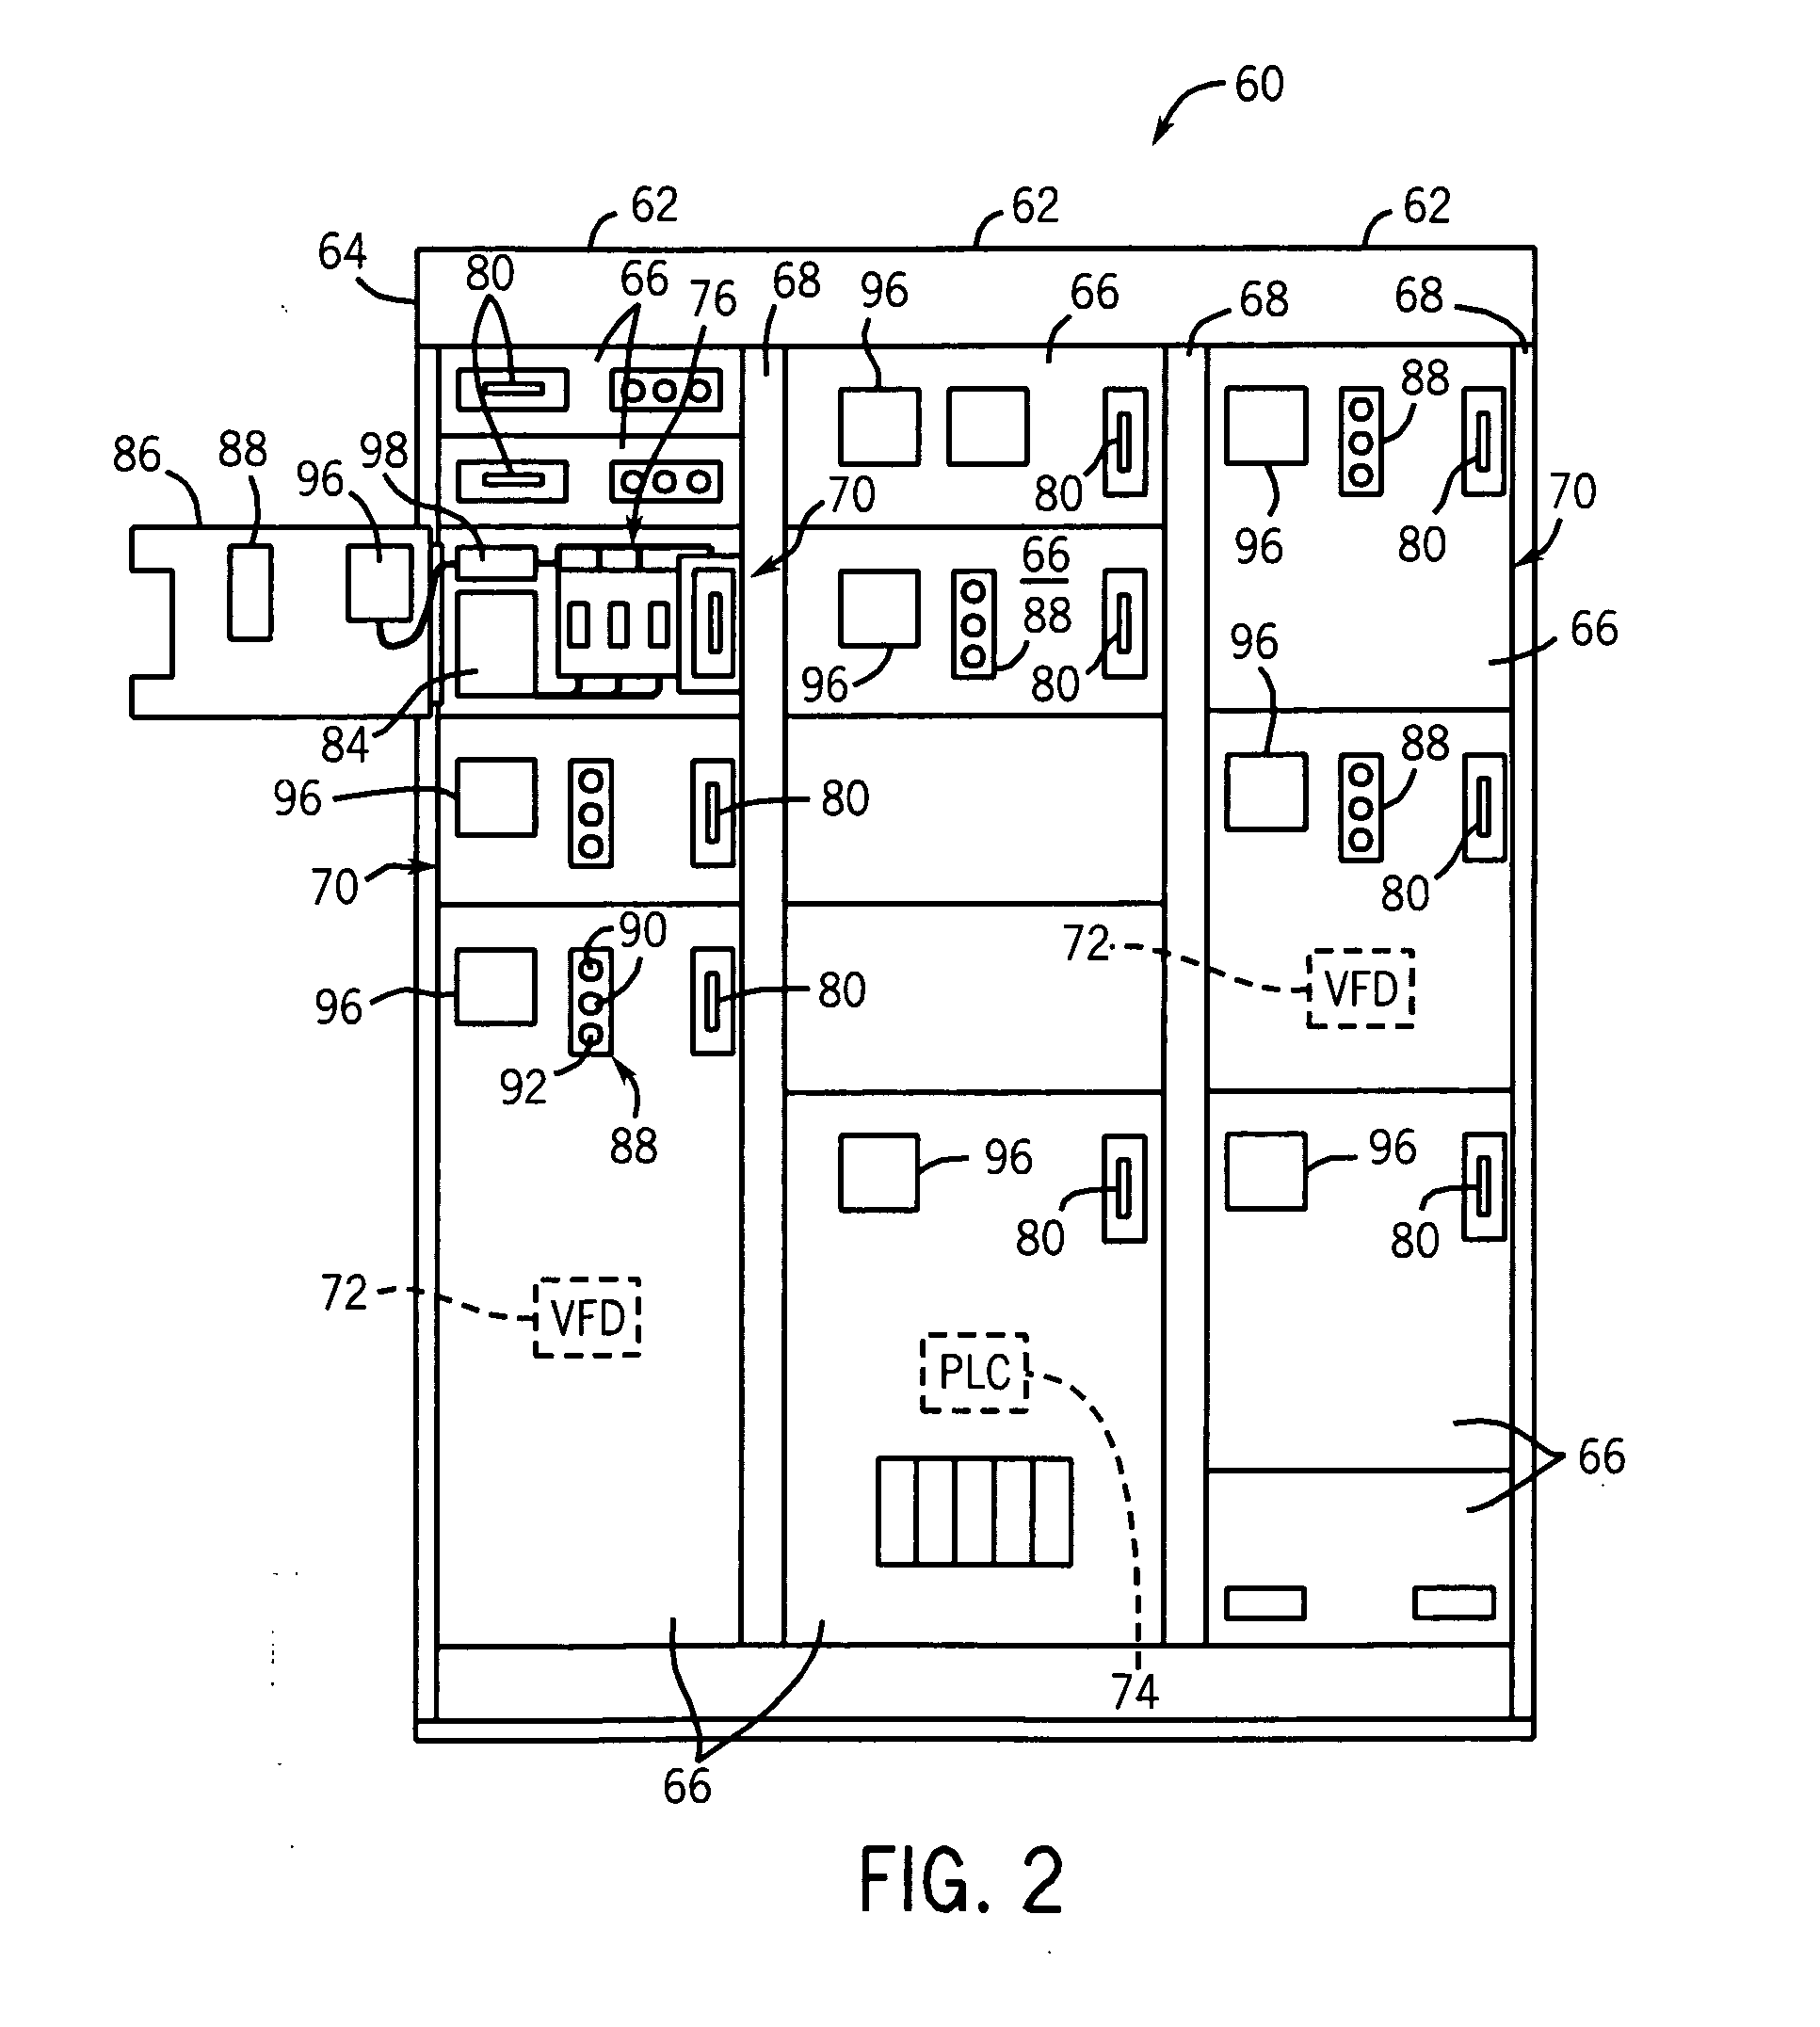 Motor control center with power and data distribution bus